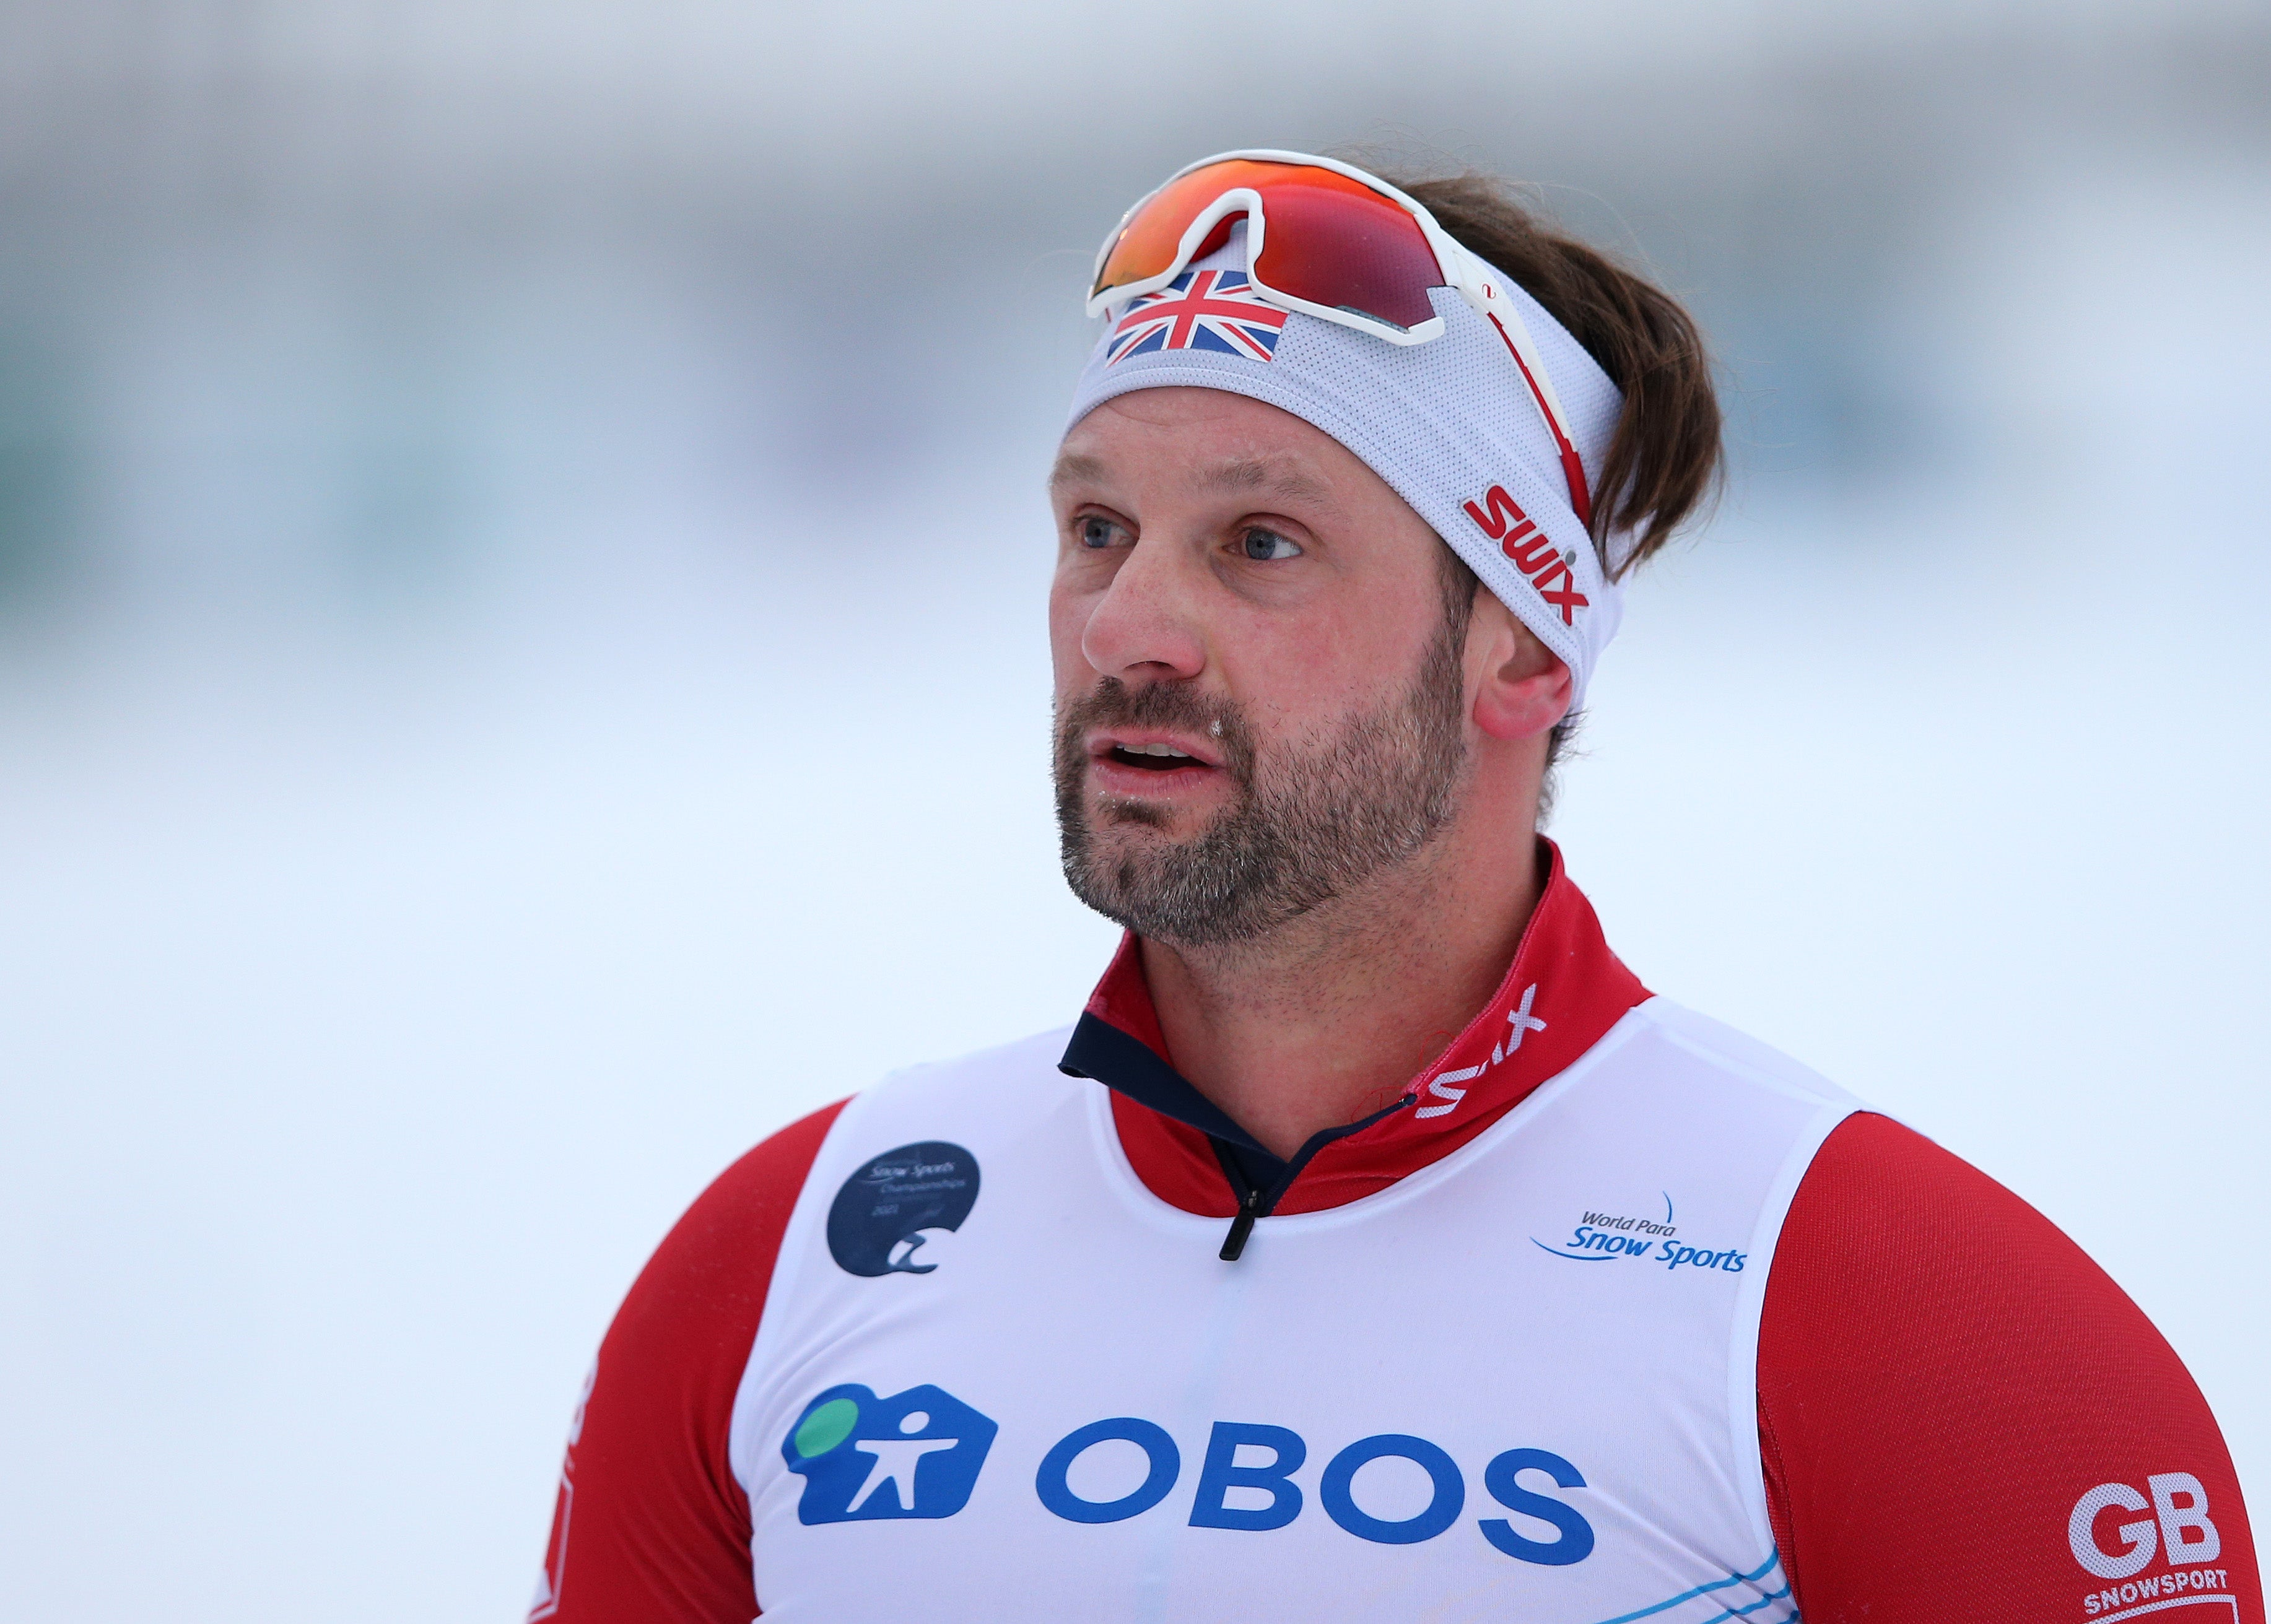 Steve Arnold of Great Britain looks on after the Men’s Sprint Sitting 6km Biathlon in Lillehammer, Norway